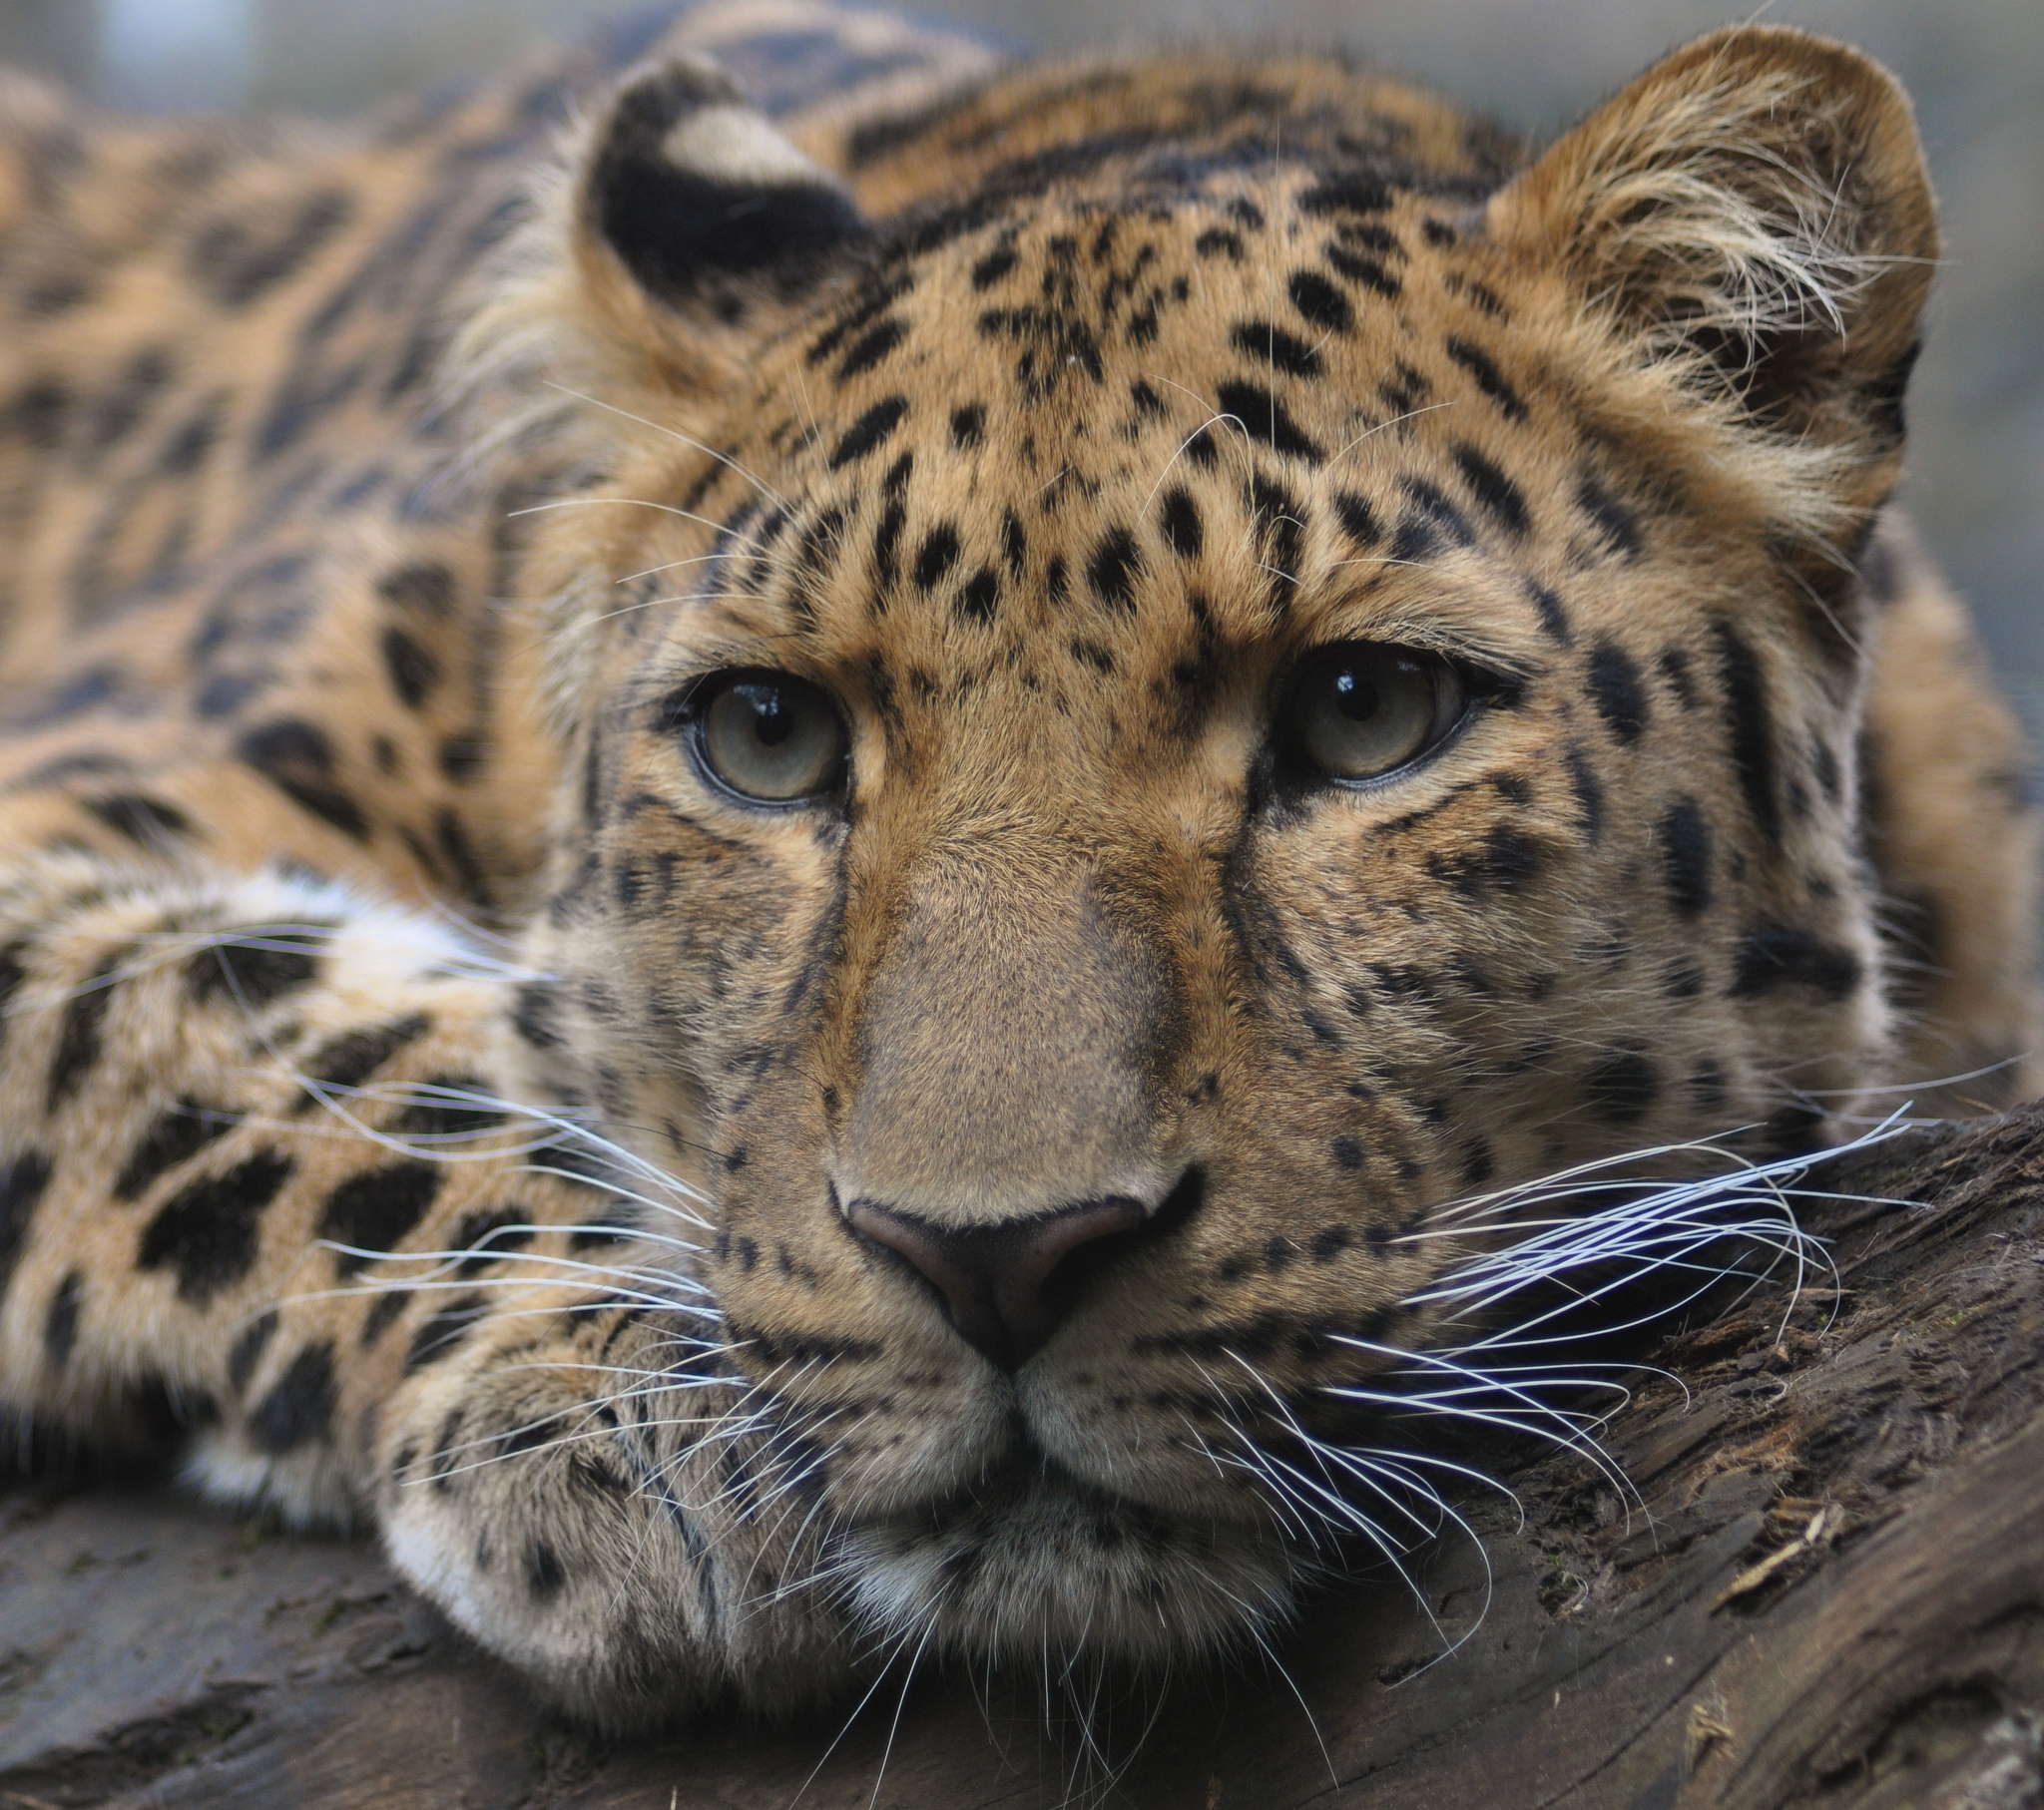 Free animal, the amur leopard is a beautiful wallpaper for desk